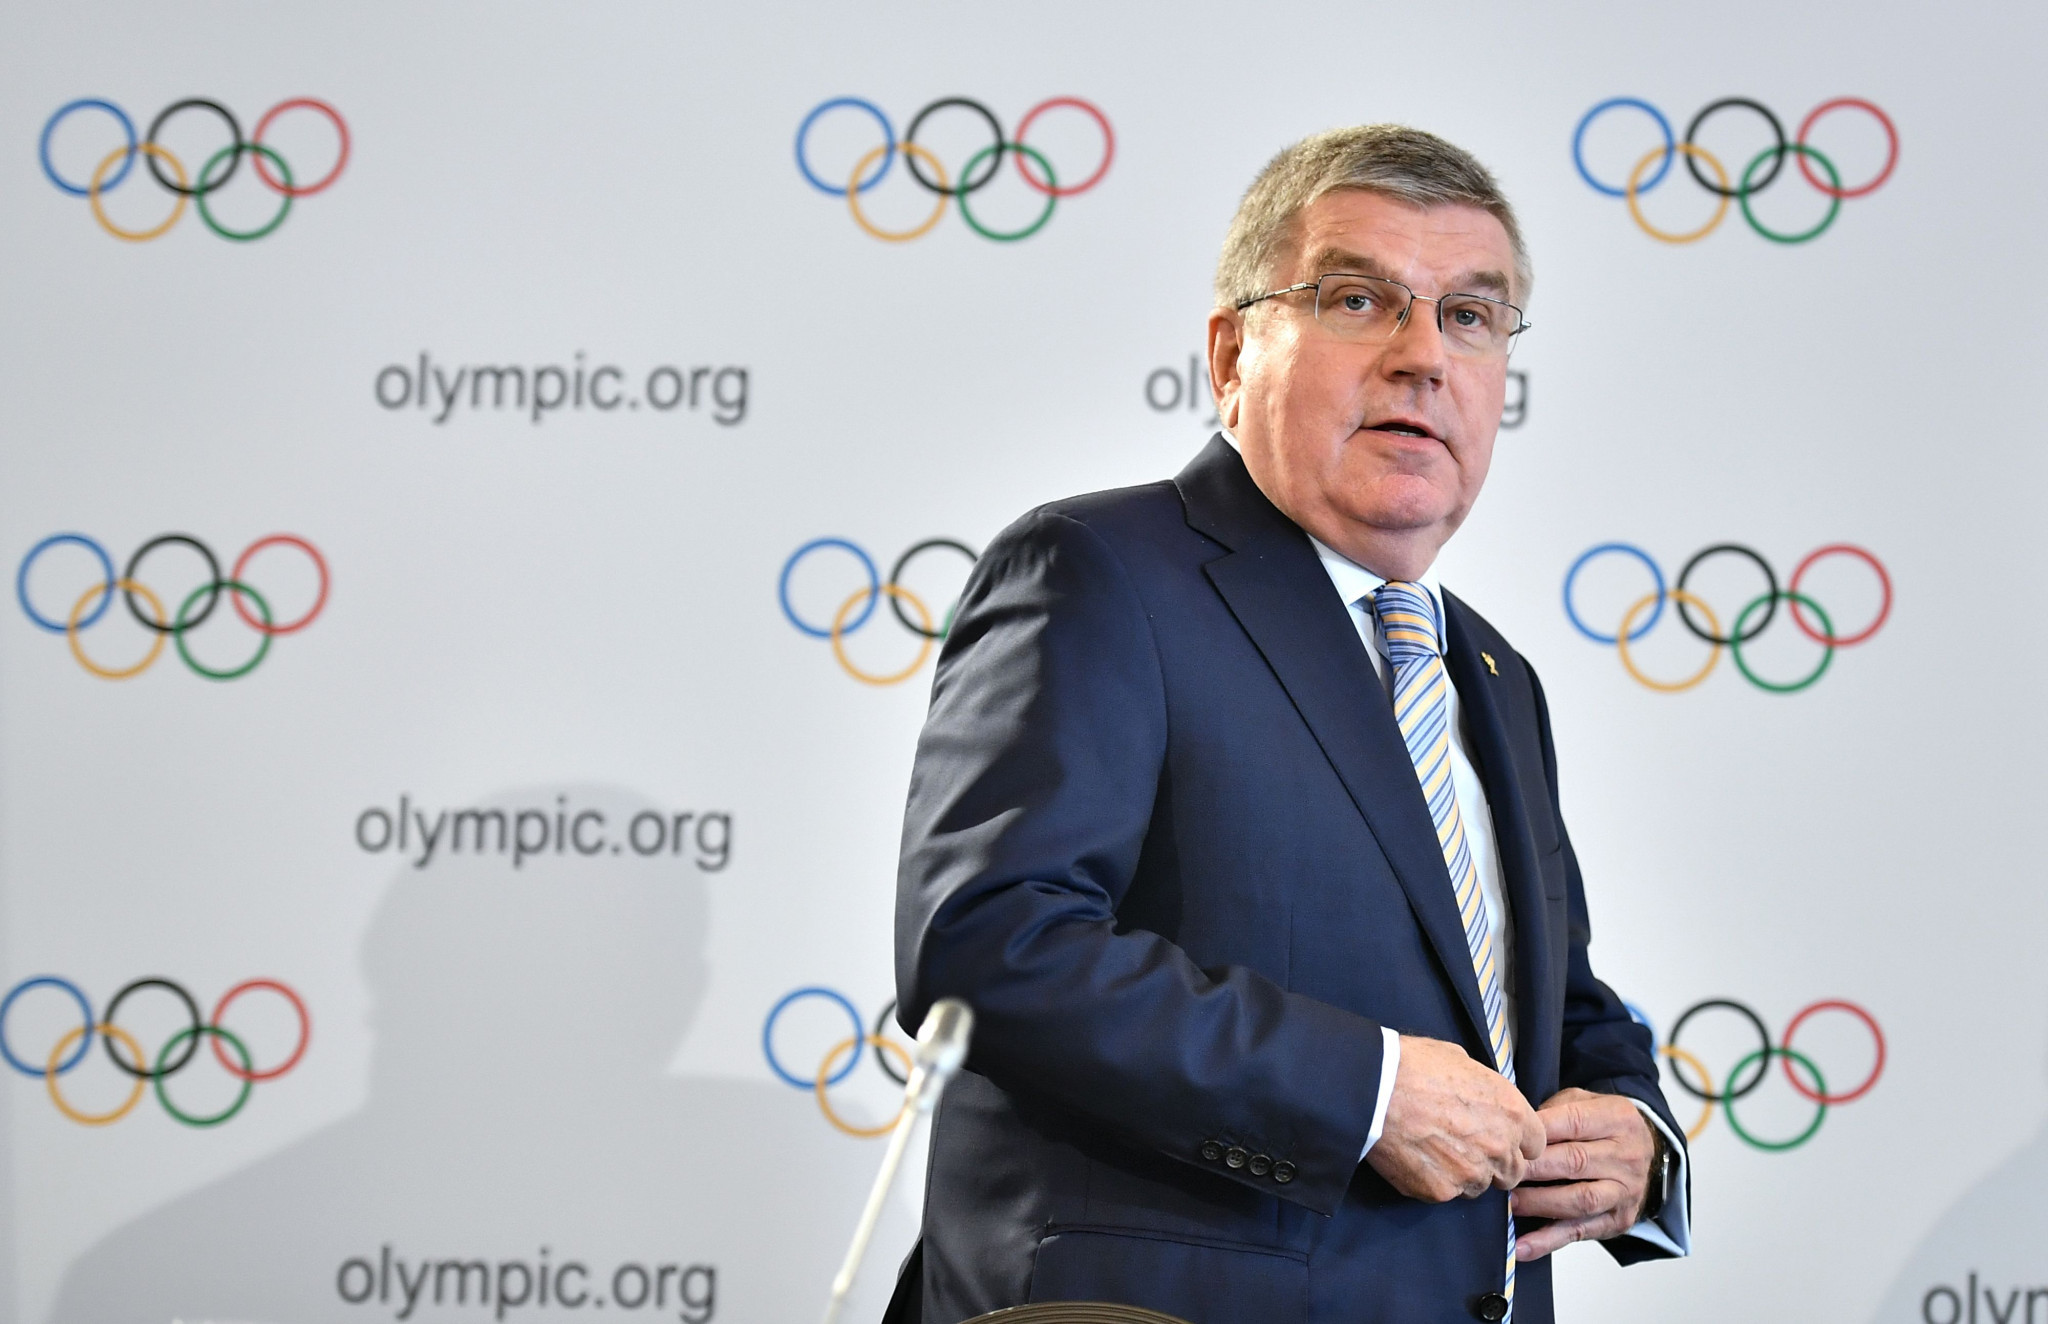 Representatives from the International Olympic Committee, including President Thomas Bach, are meeting with CONI in Lausanne today to discuss Italy's faltering bid for the the 2026 Winter Olympic and Paralympic Games ©Getty Images